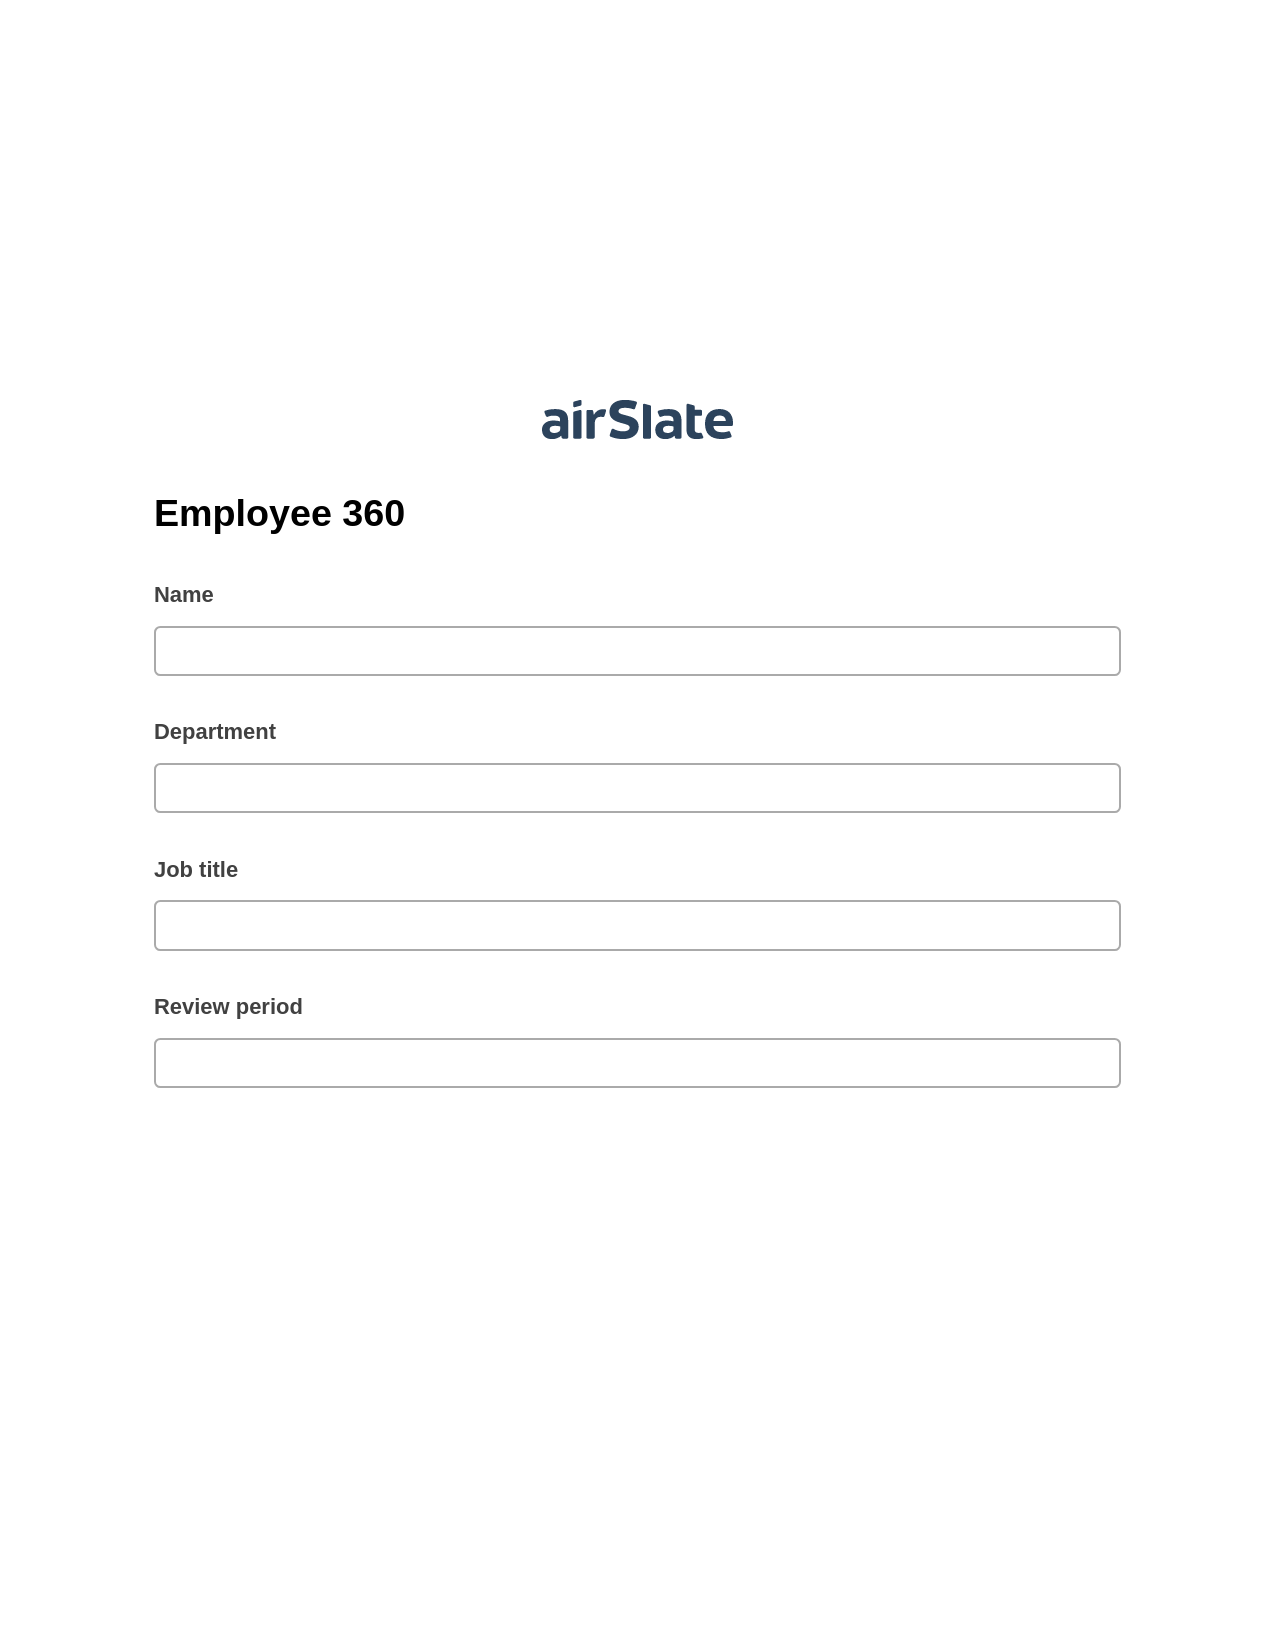 Employee 360 Pre-fill from CSV File Bot, Jira Bot, Export to Excel 365 Bot